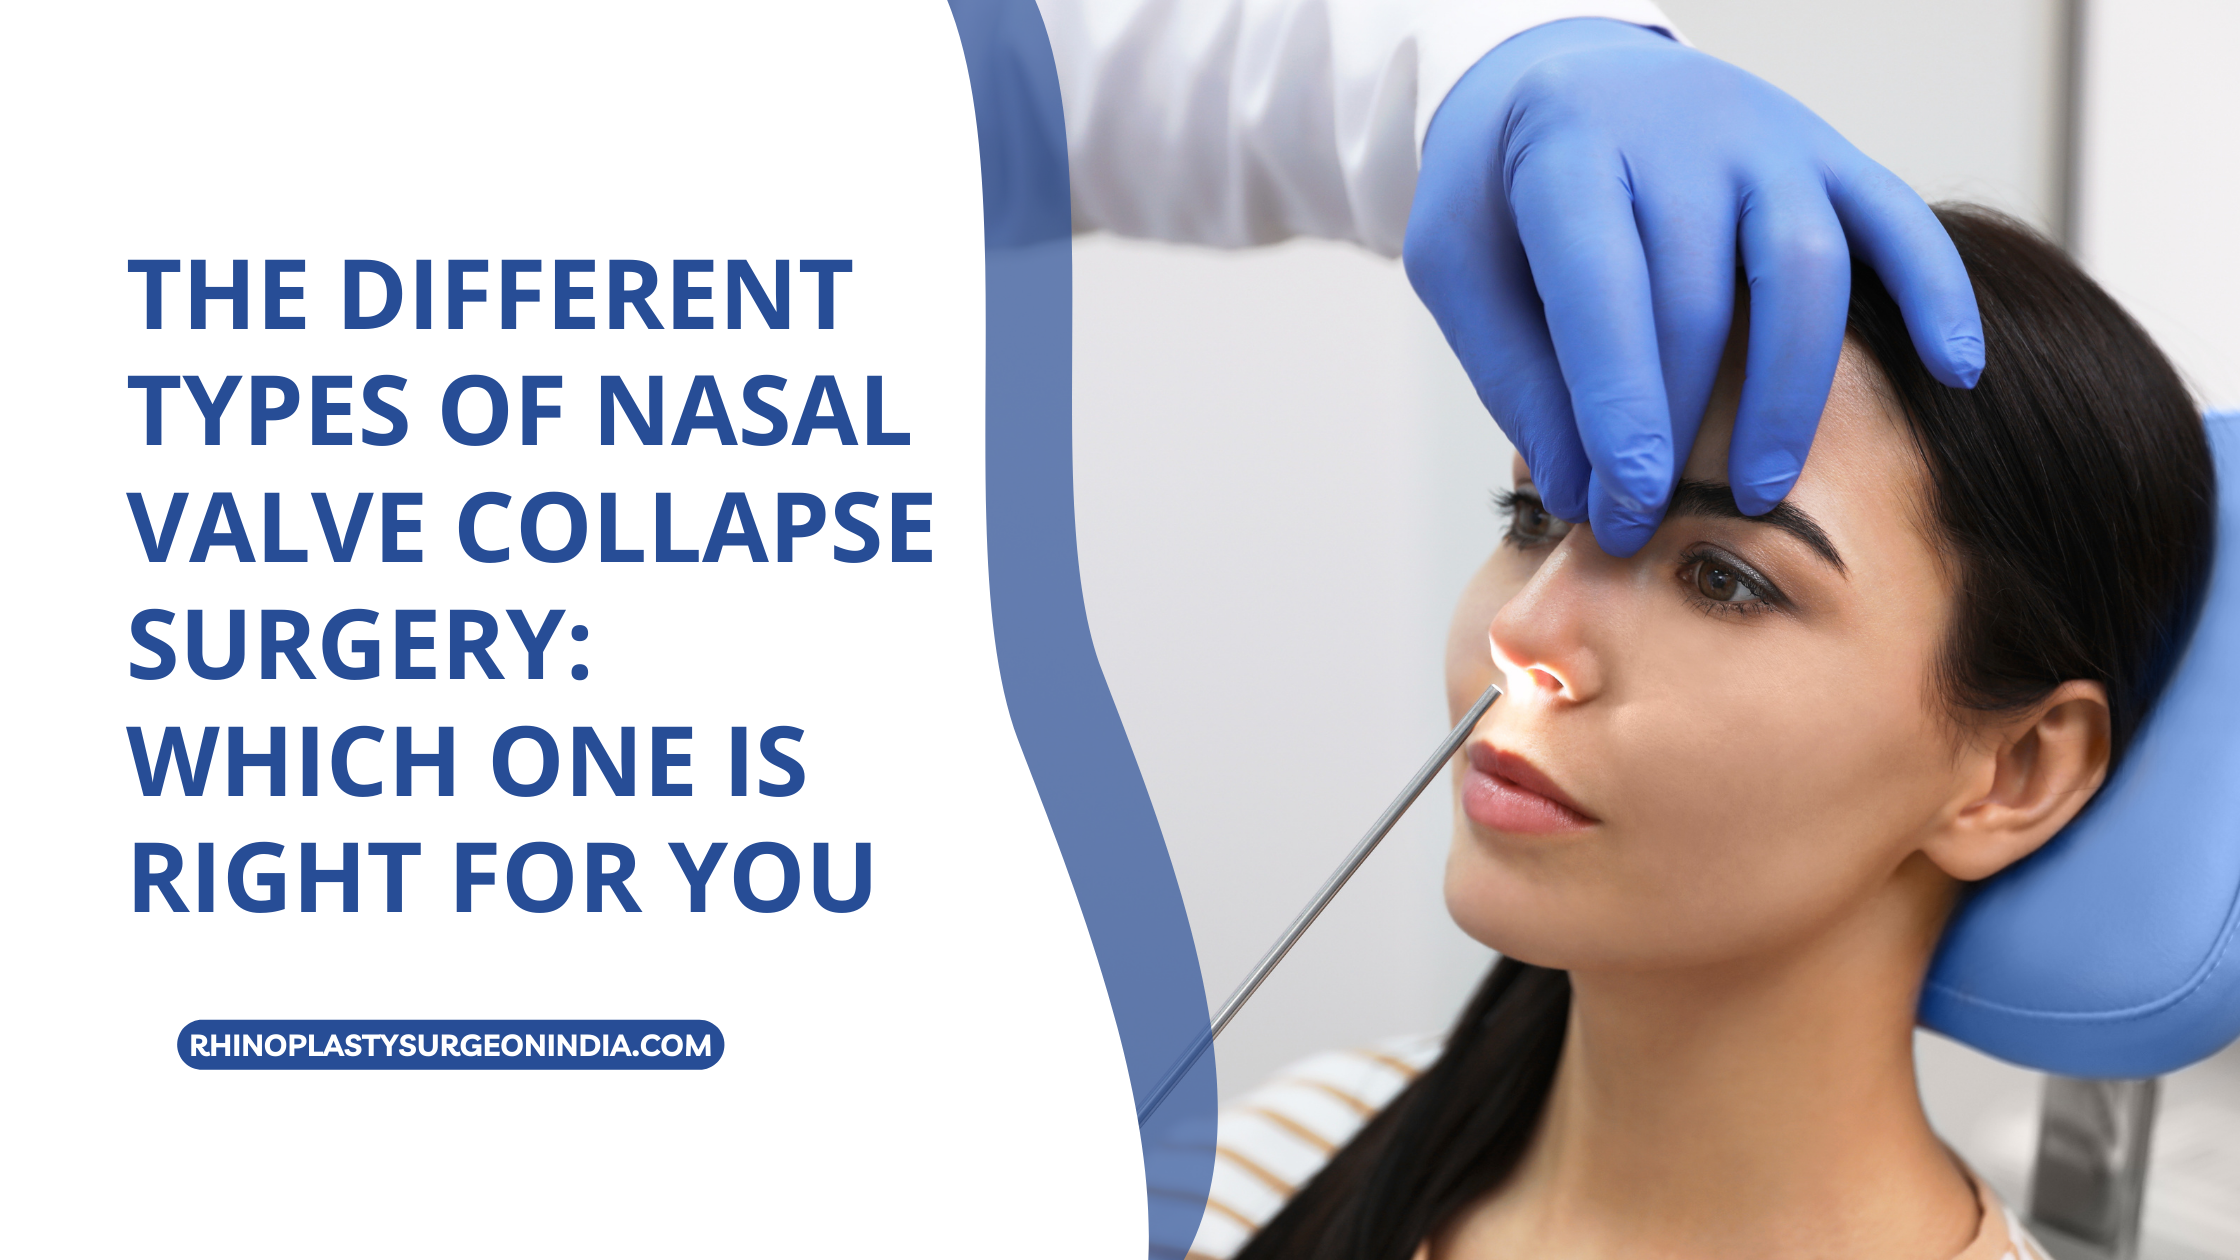 The Different Types of Nasal Valve Collapse Surgery: Which One is Right for You